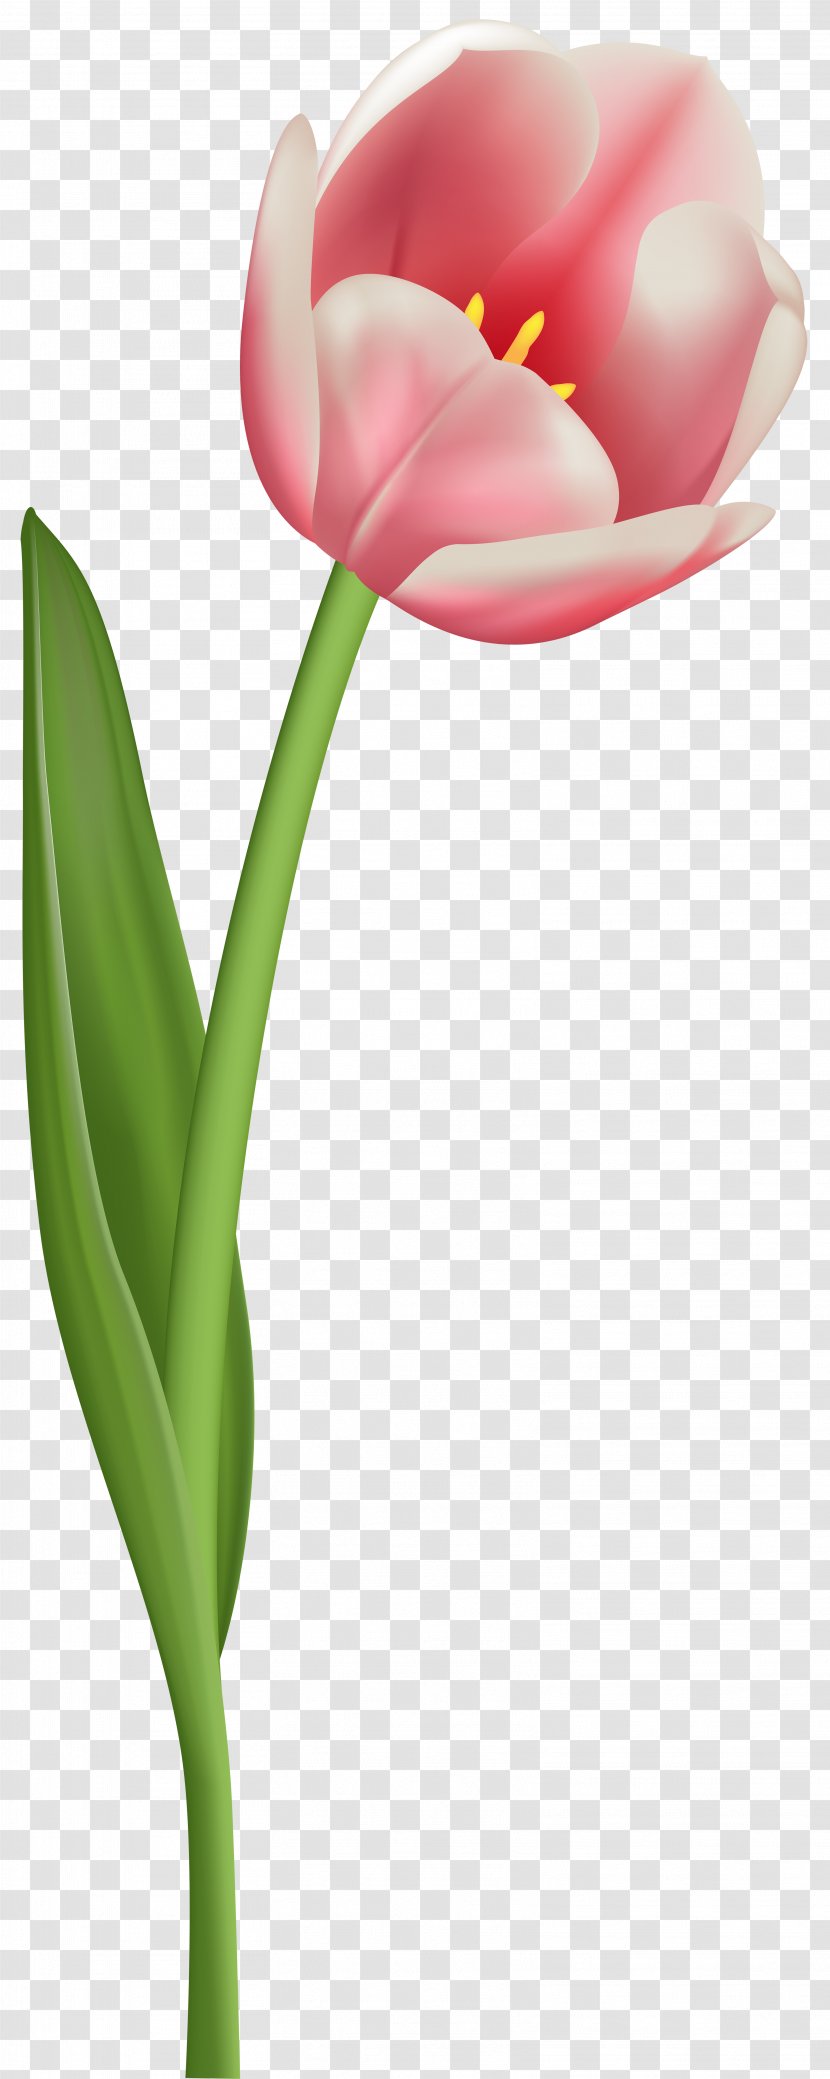 Tulip Mania Flower Clip Art - Lily Family - Rustic Flowers Transparent PNG